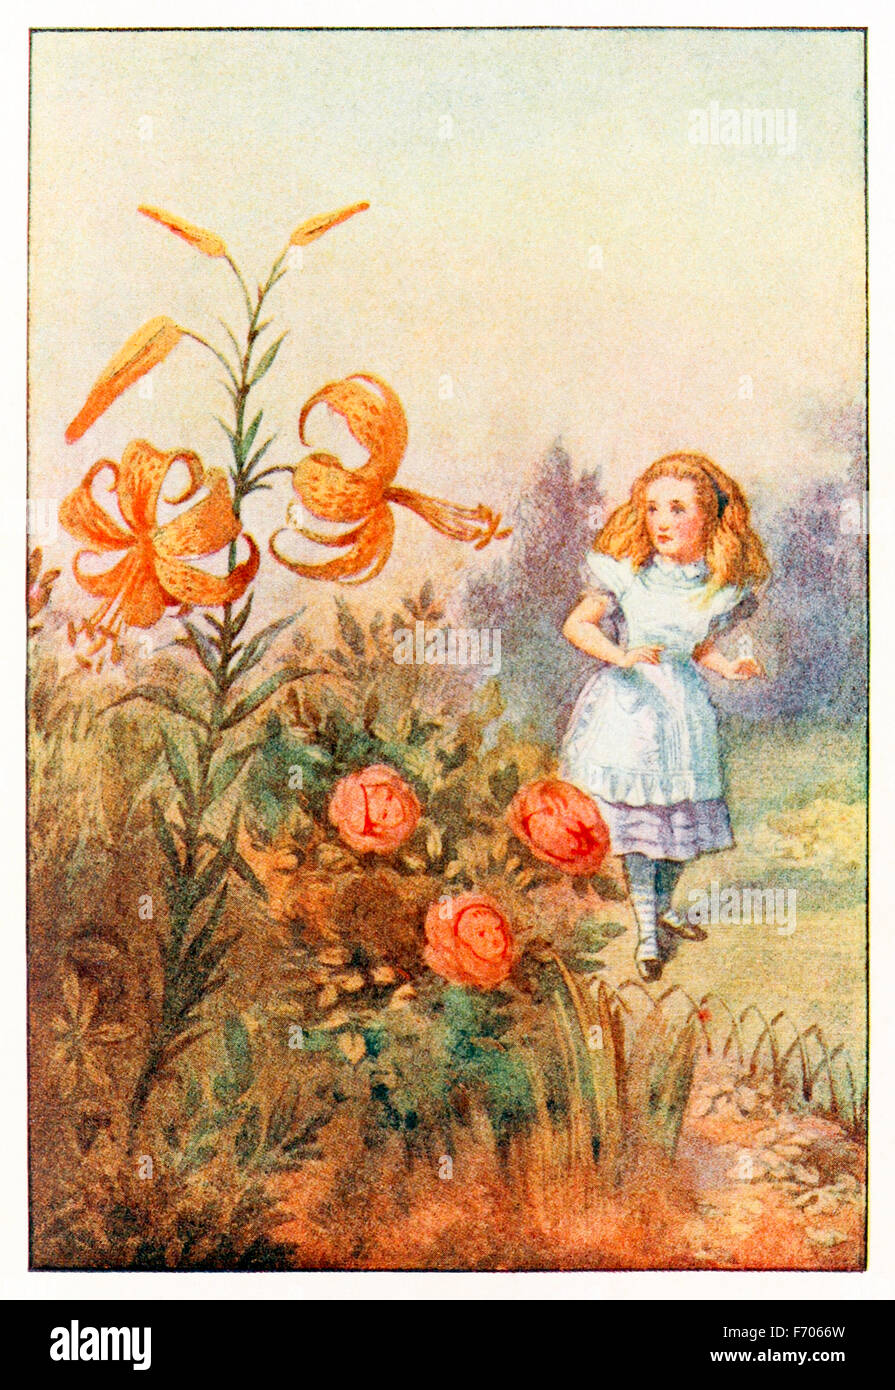 'We can talk,' said Tiger-lily, 'when there's anybody worth talking to' from 'Through the Looking-Glass and What Alice Found There' by Lewis Carroll (1832-1898), illustrated by Sir John Tenniel. See description for more information. Stock Photo